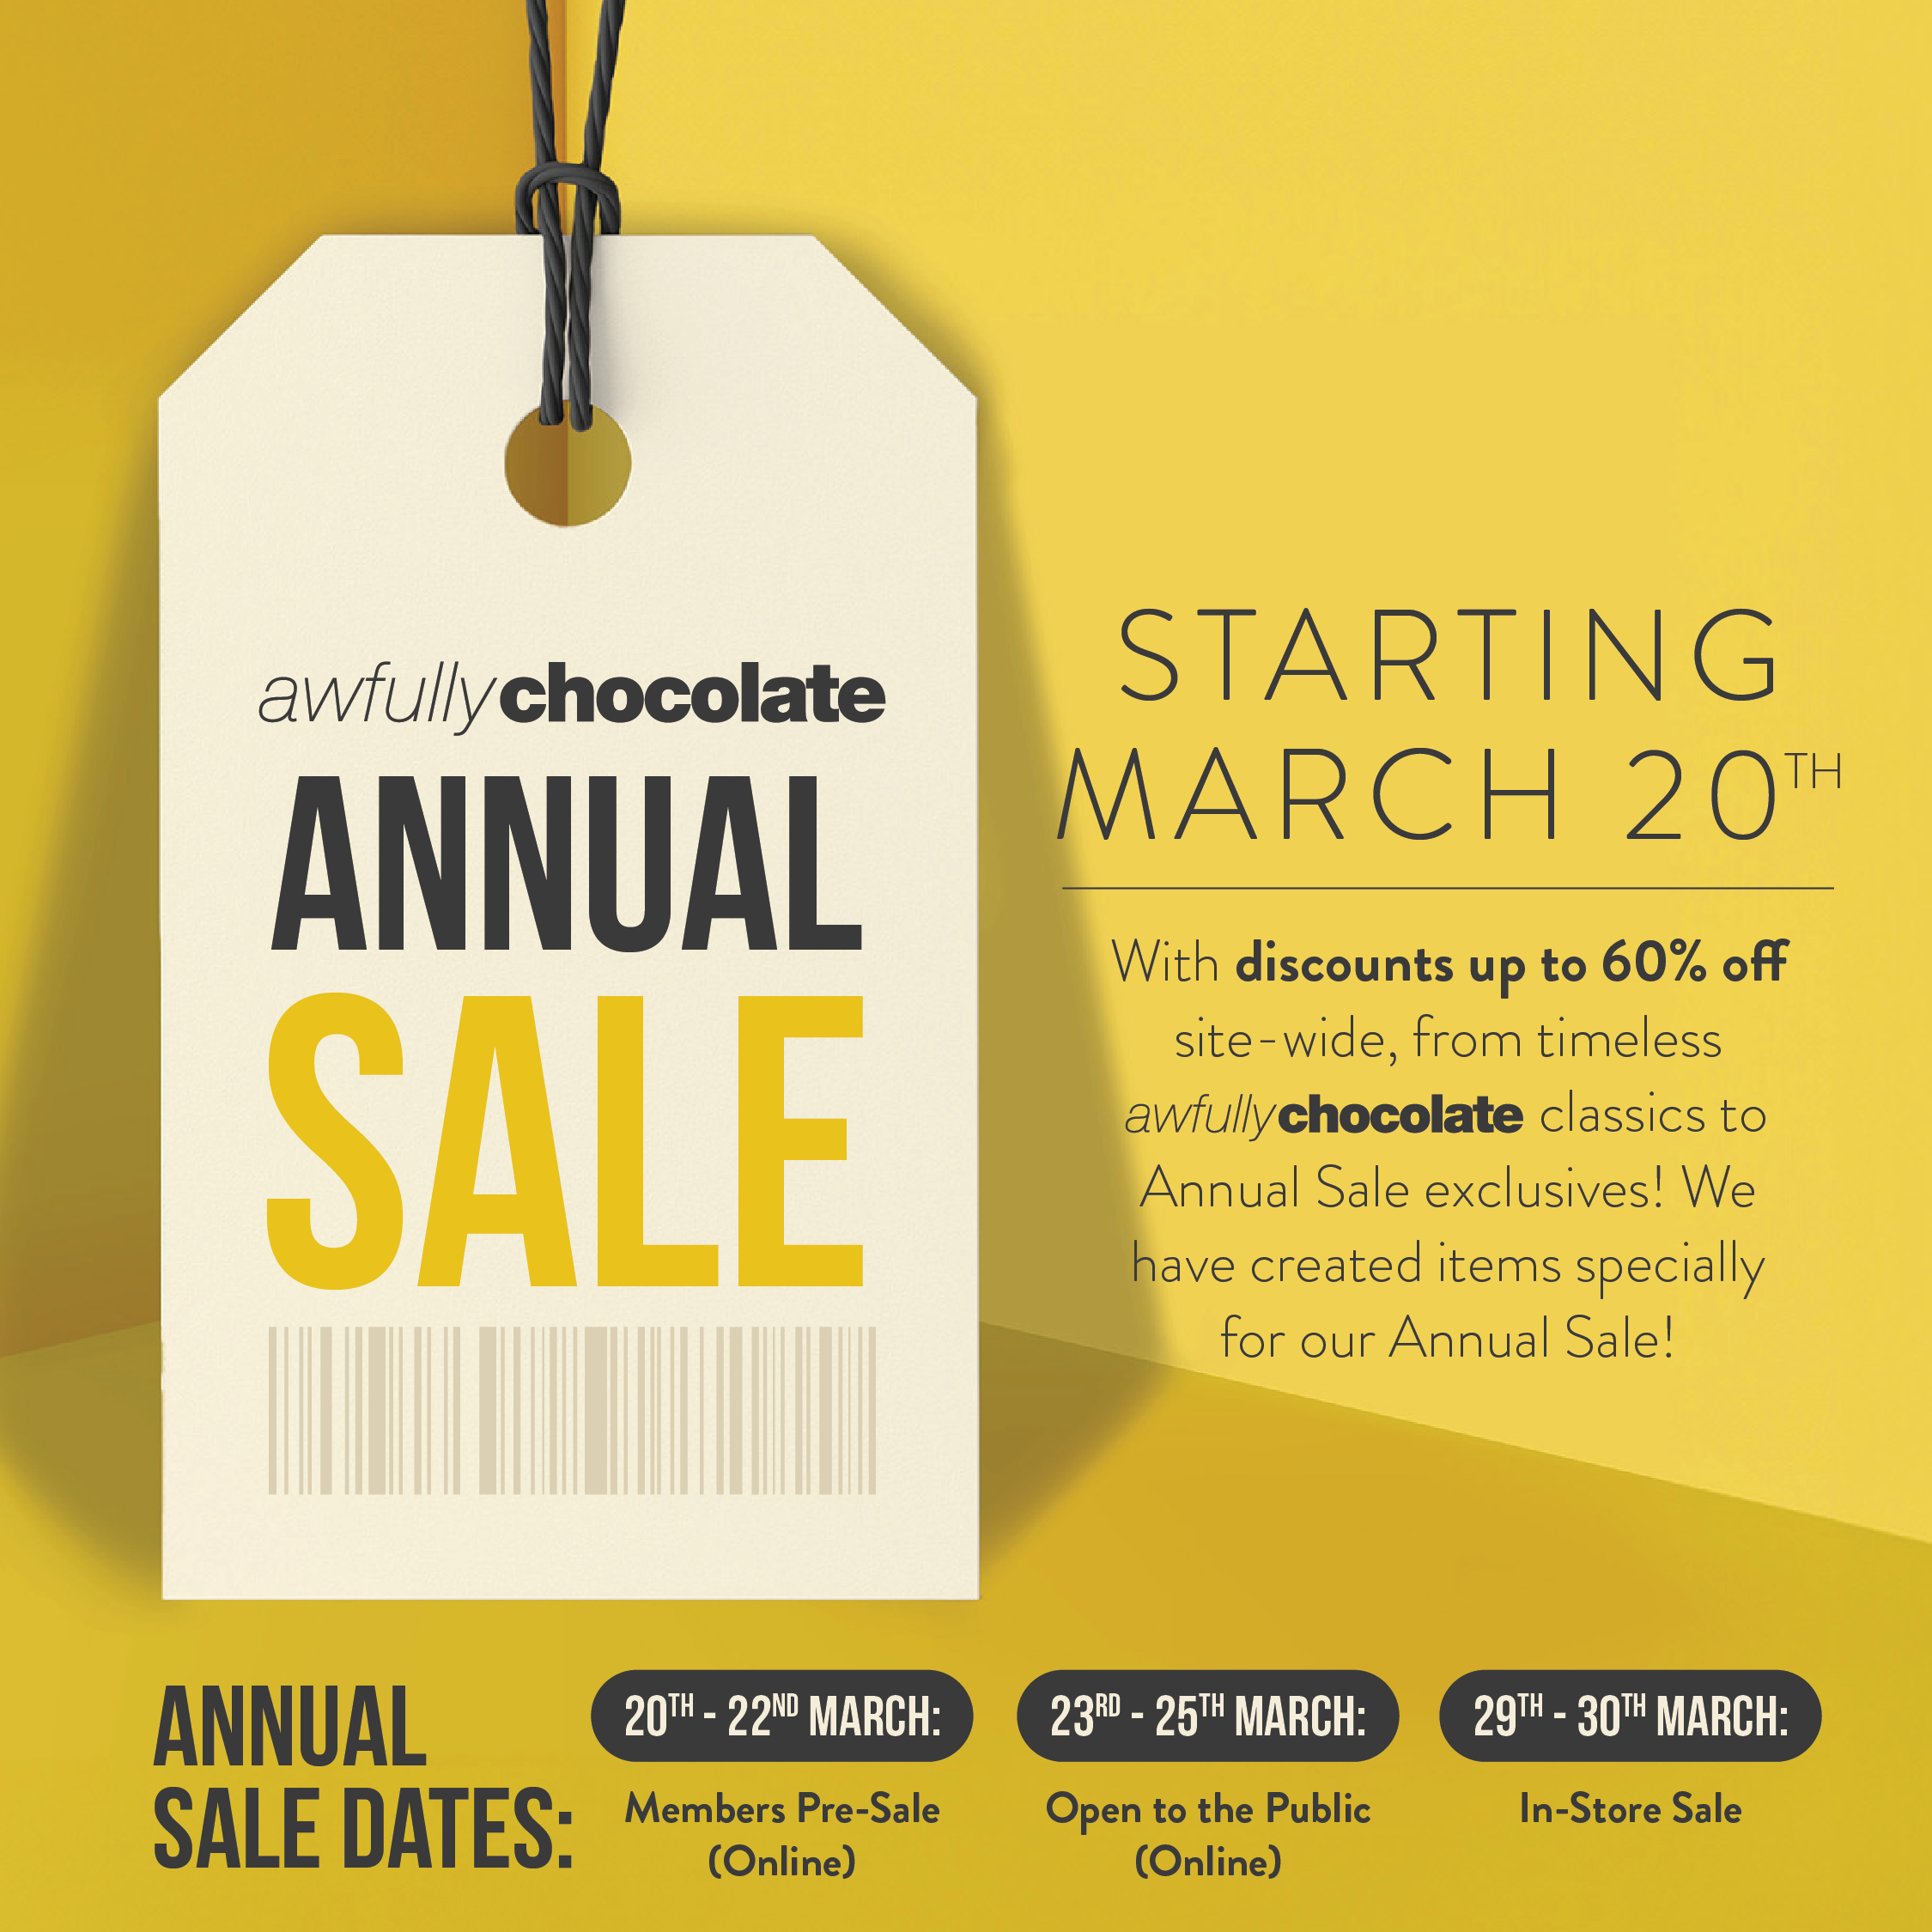 Awfully Chocolate Annual Sale